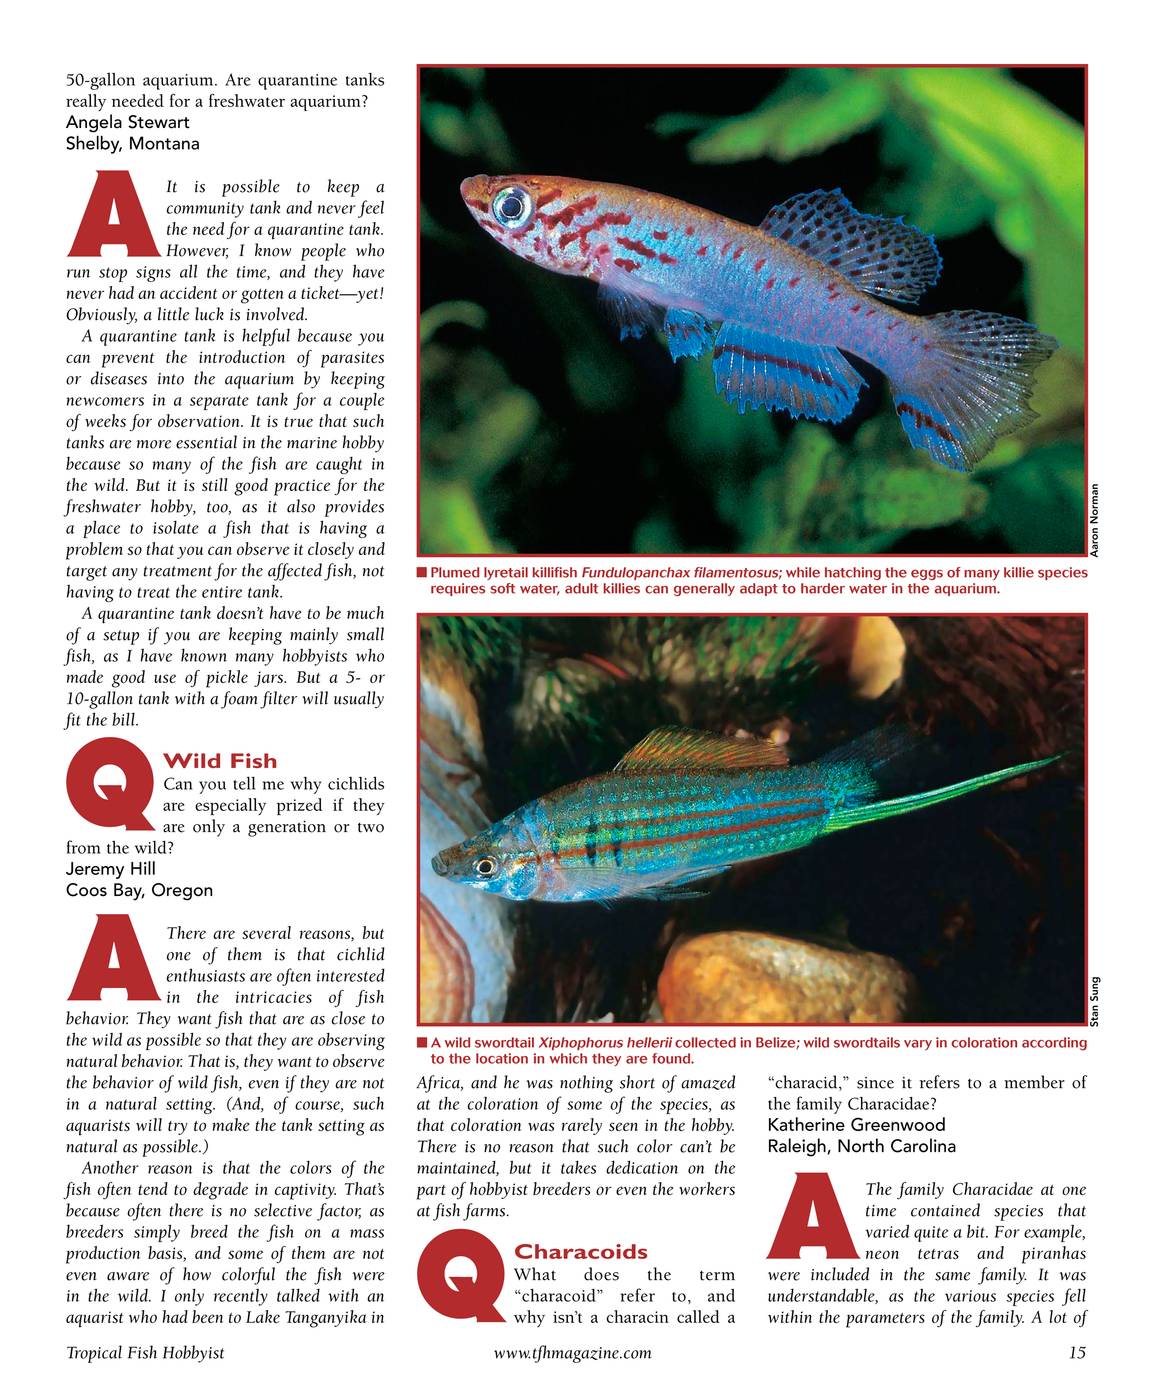 February 2008 - page 15 - Tropical Fish Hobbyist